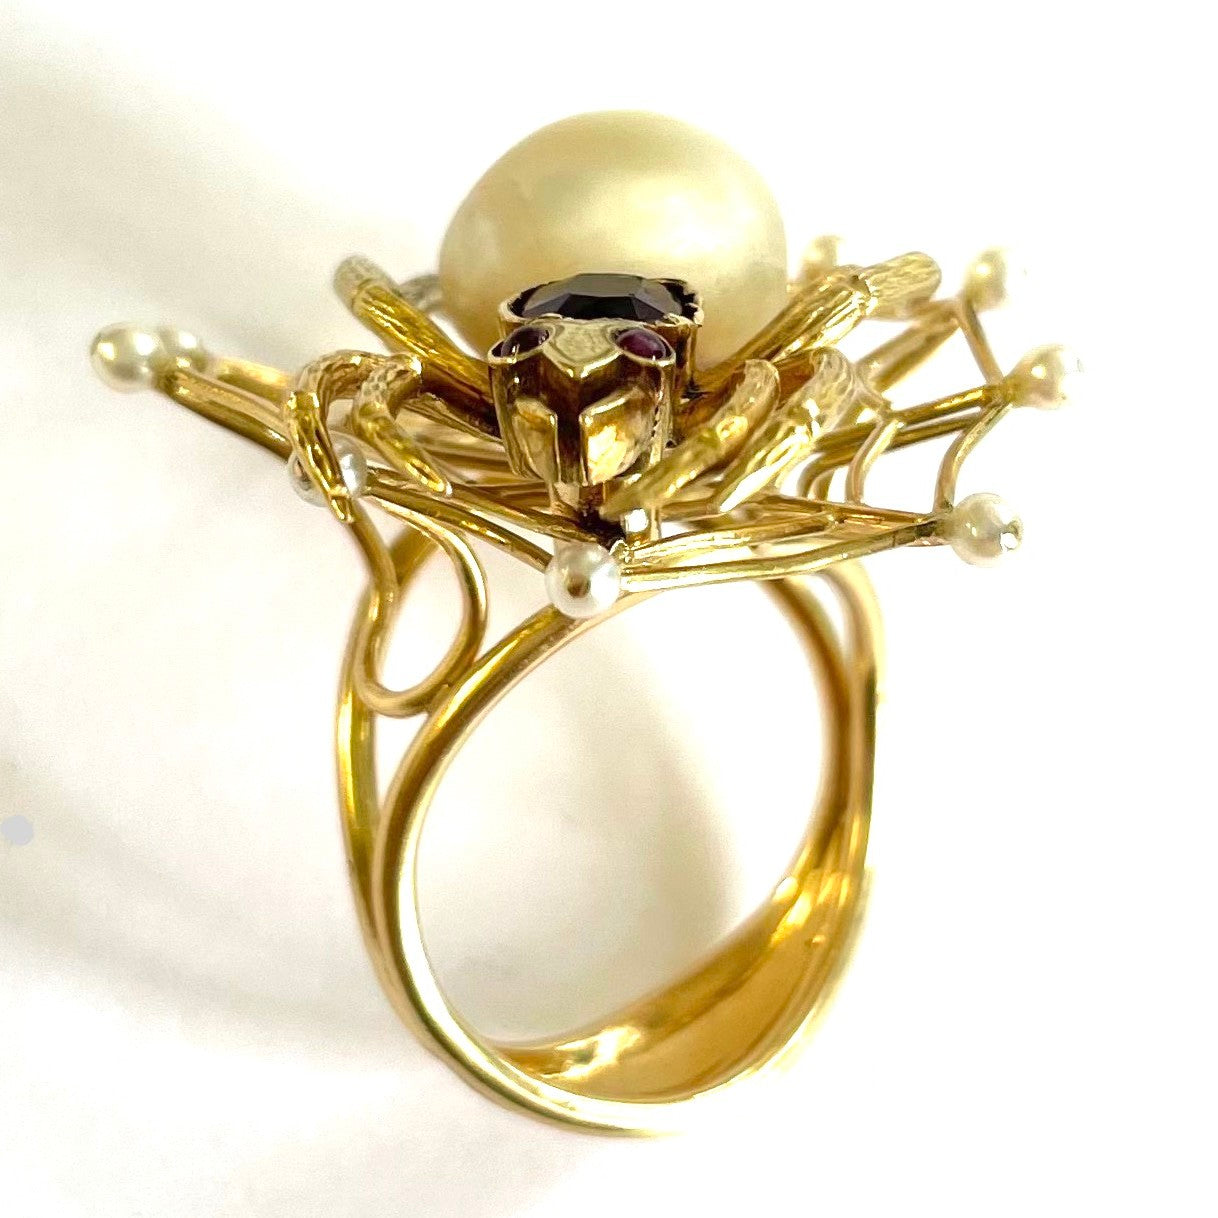 Post-1980s 18KT Yellow Gold Natural Pearl & Garnet Spider Ring profile view